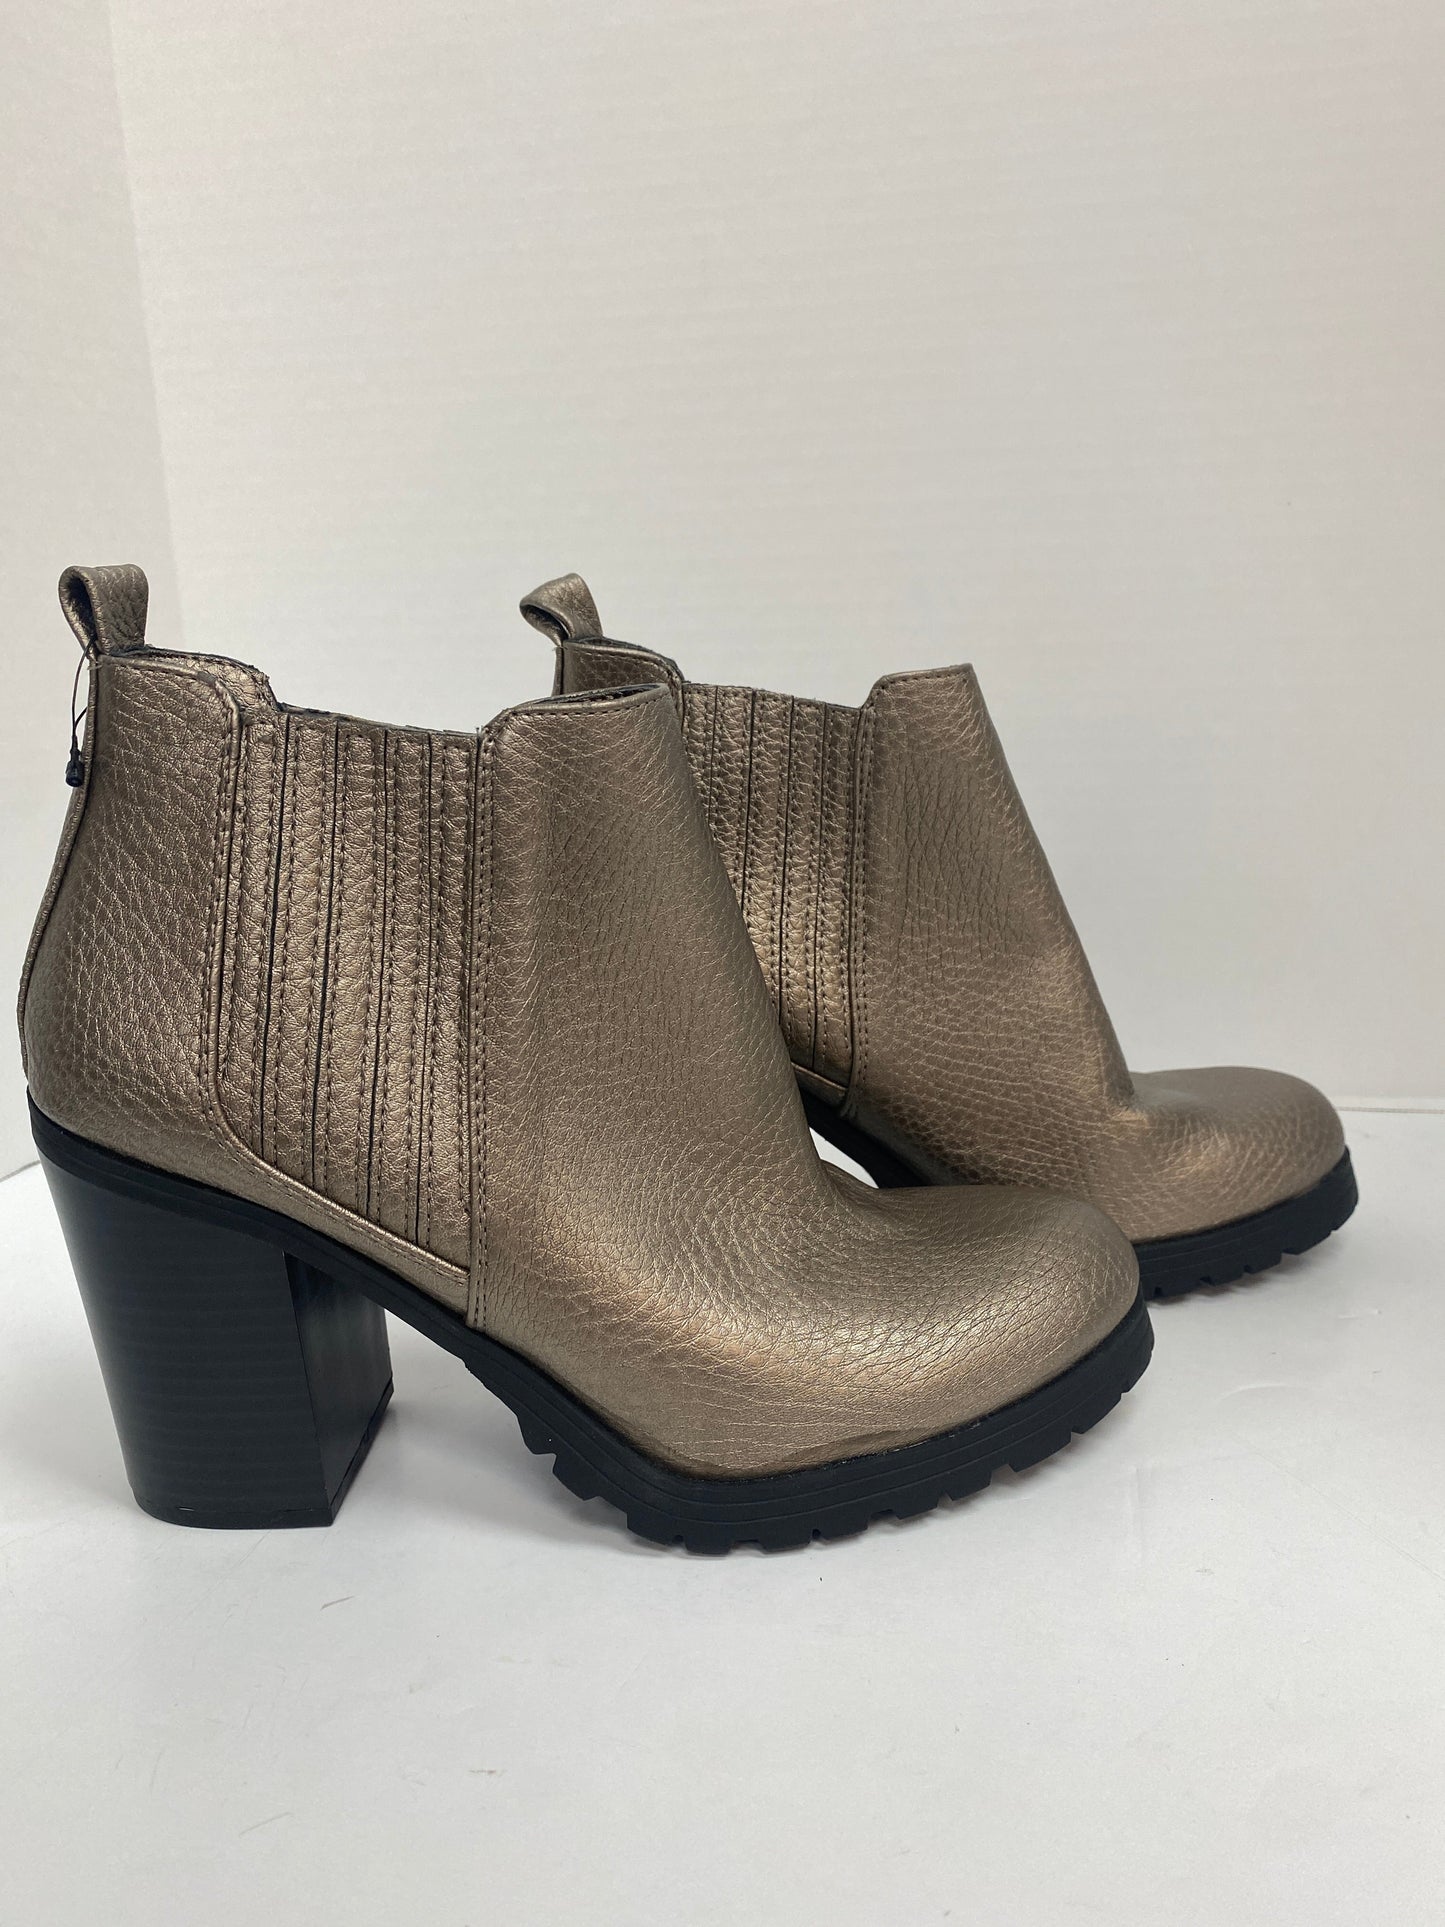 Boots Ankle Heels By Sam And Libby  Size: 8.5